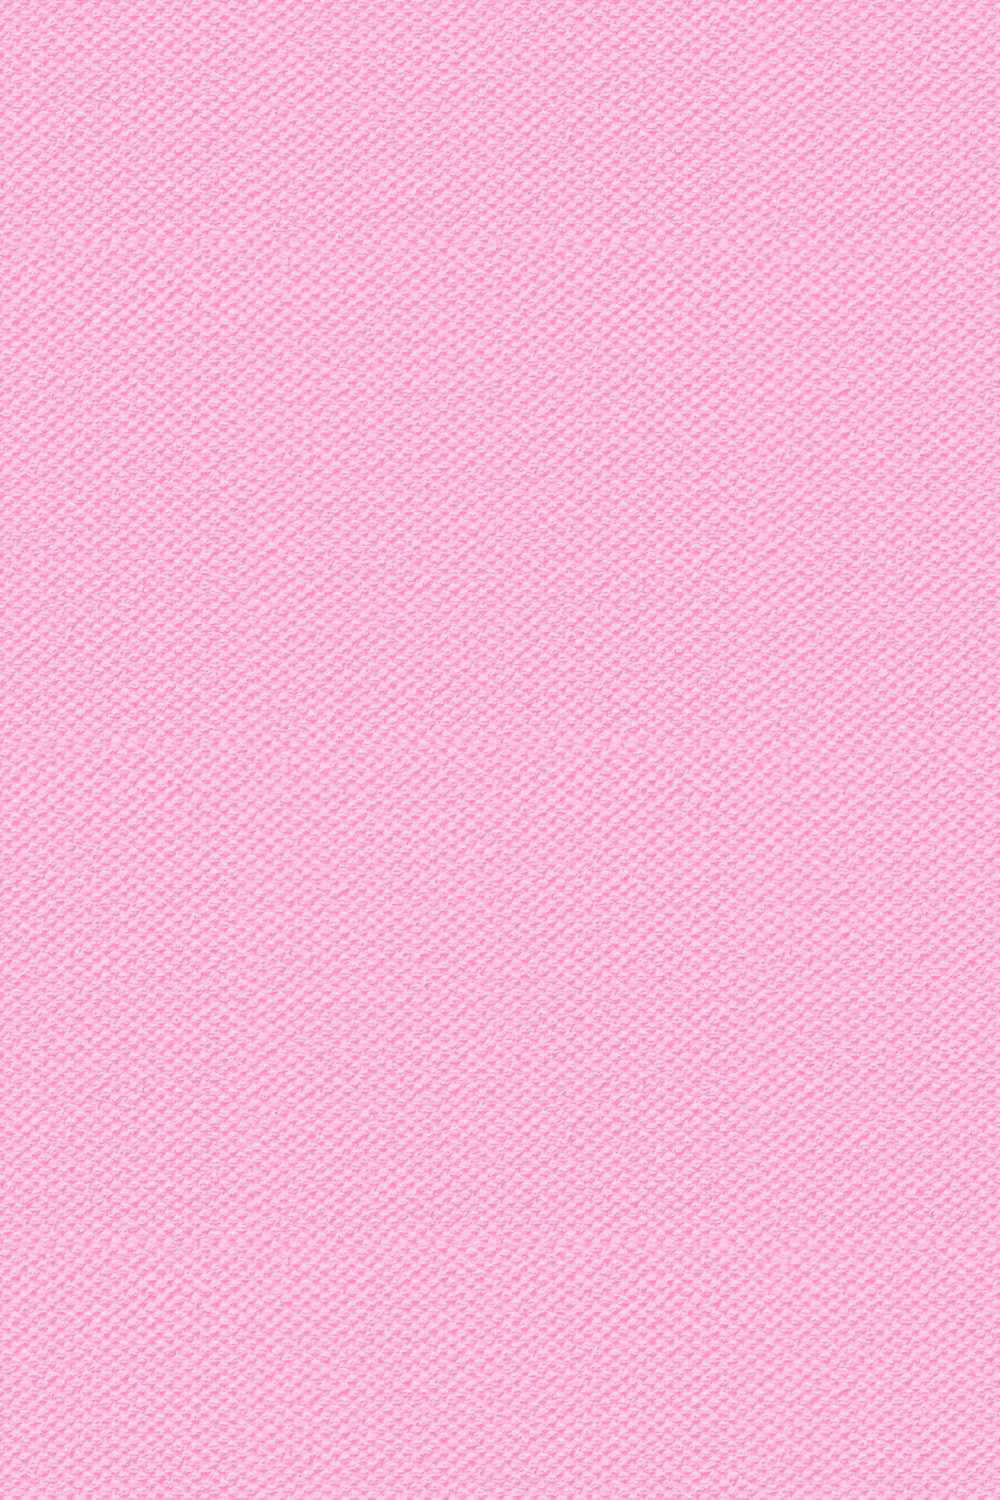 Sweet and Subtle Blush Pink Background